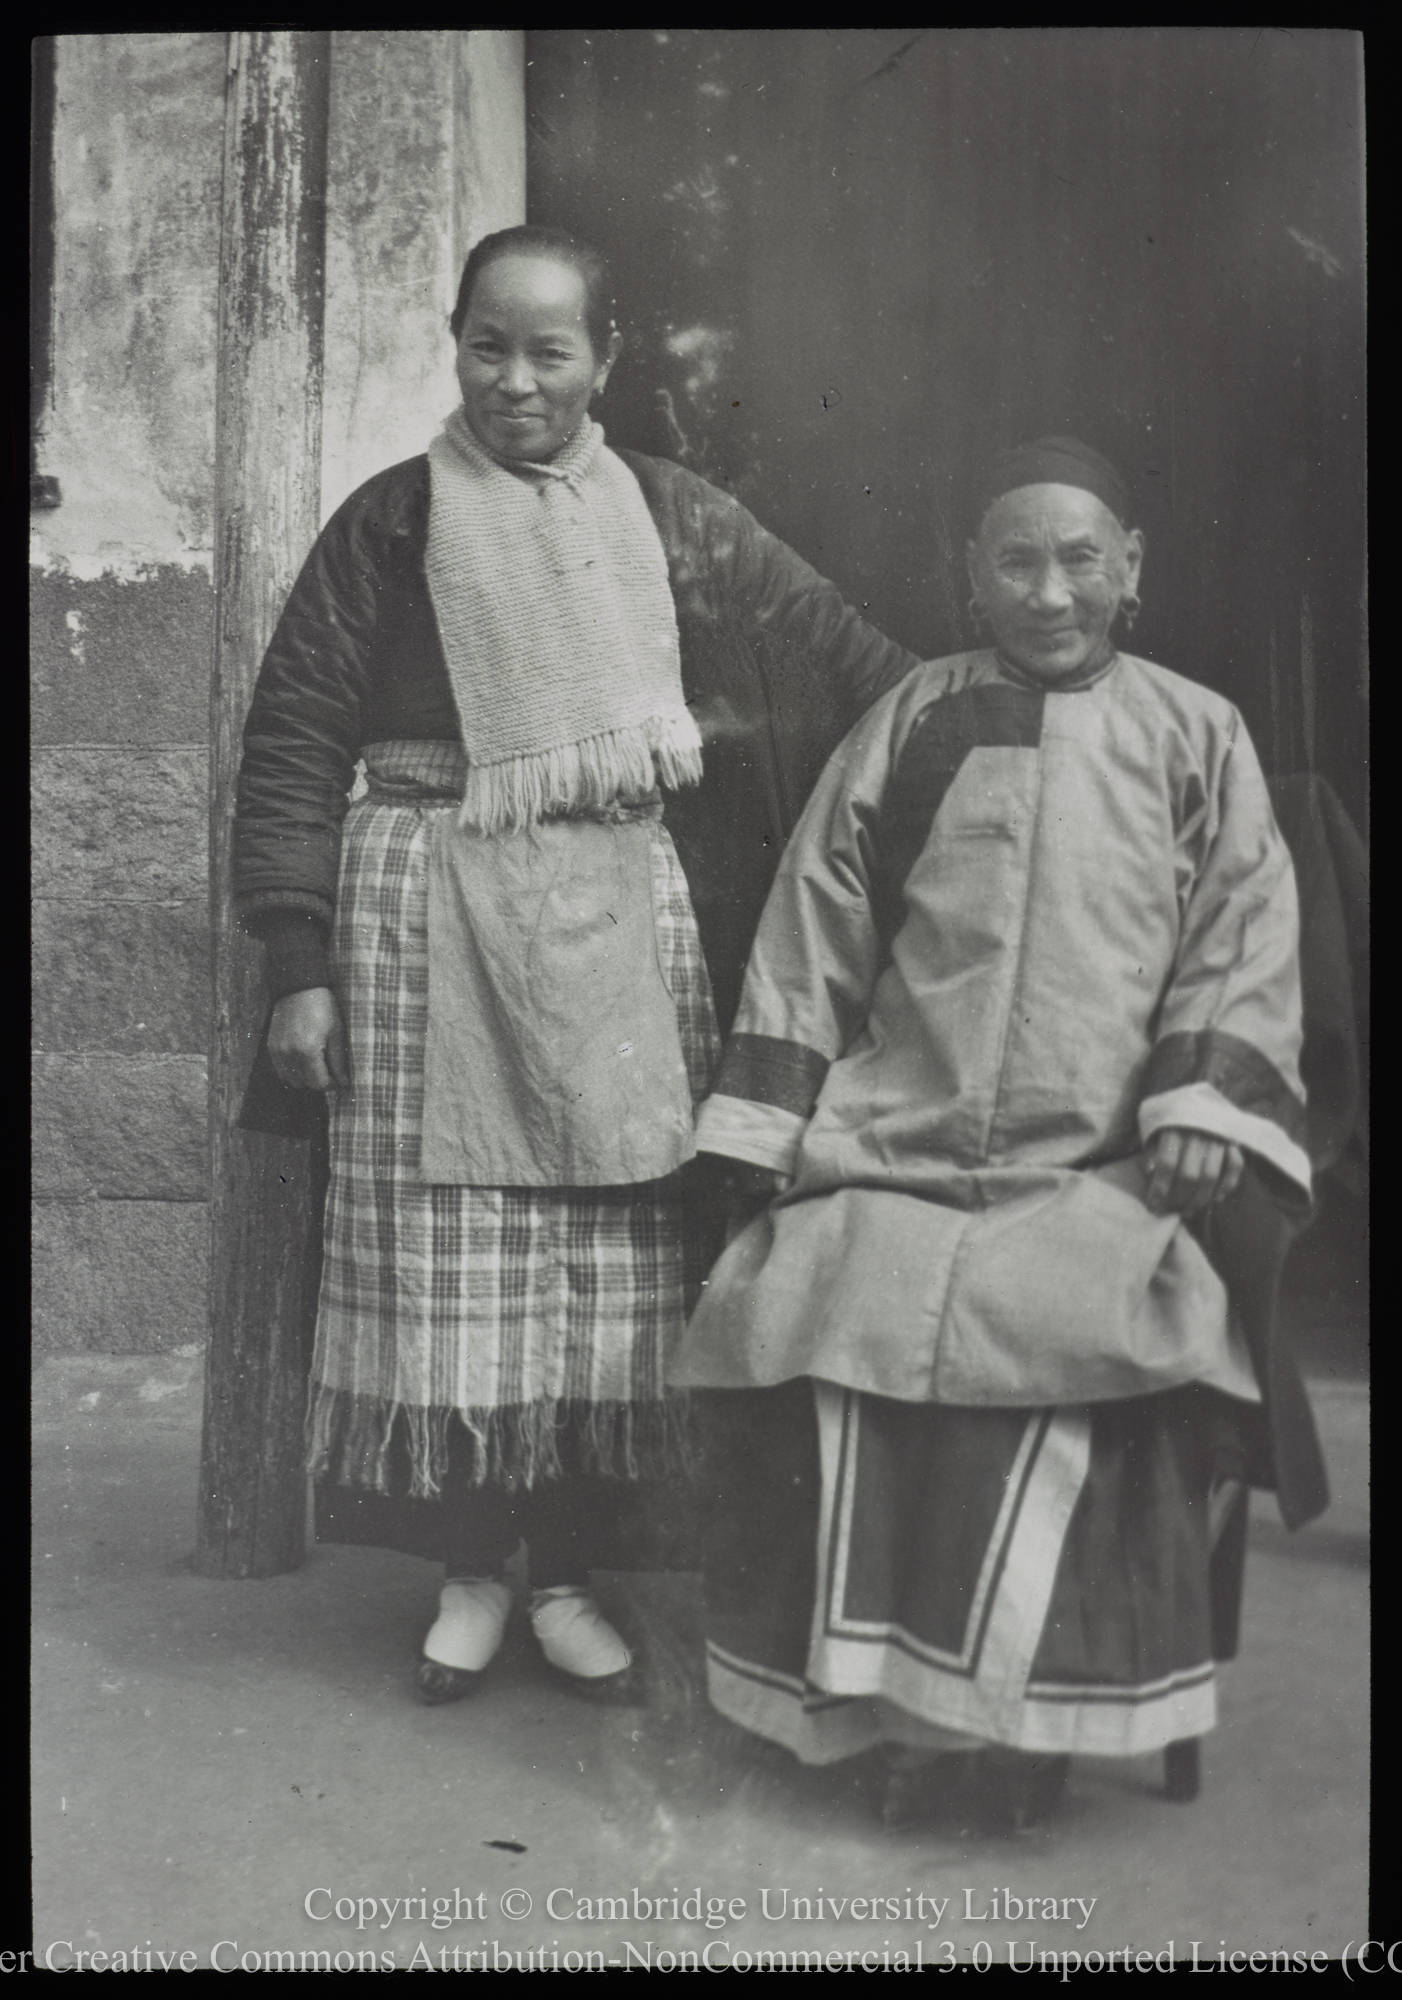 Elderly Chinese man and woman, 1900 - 1920